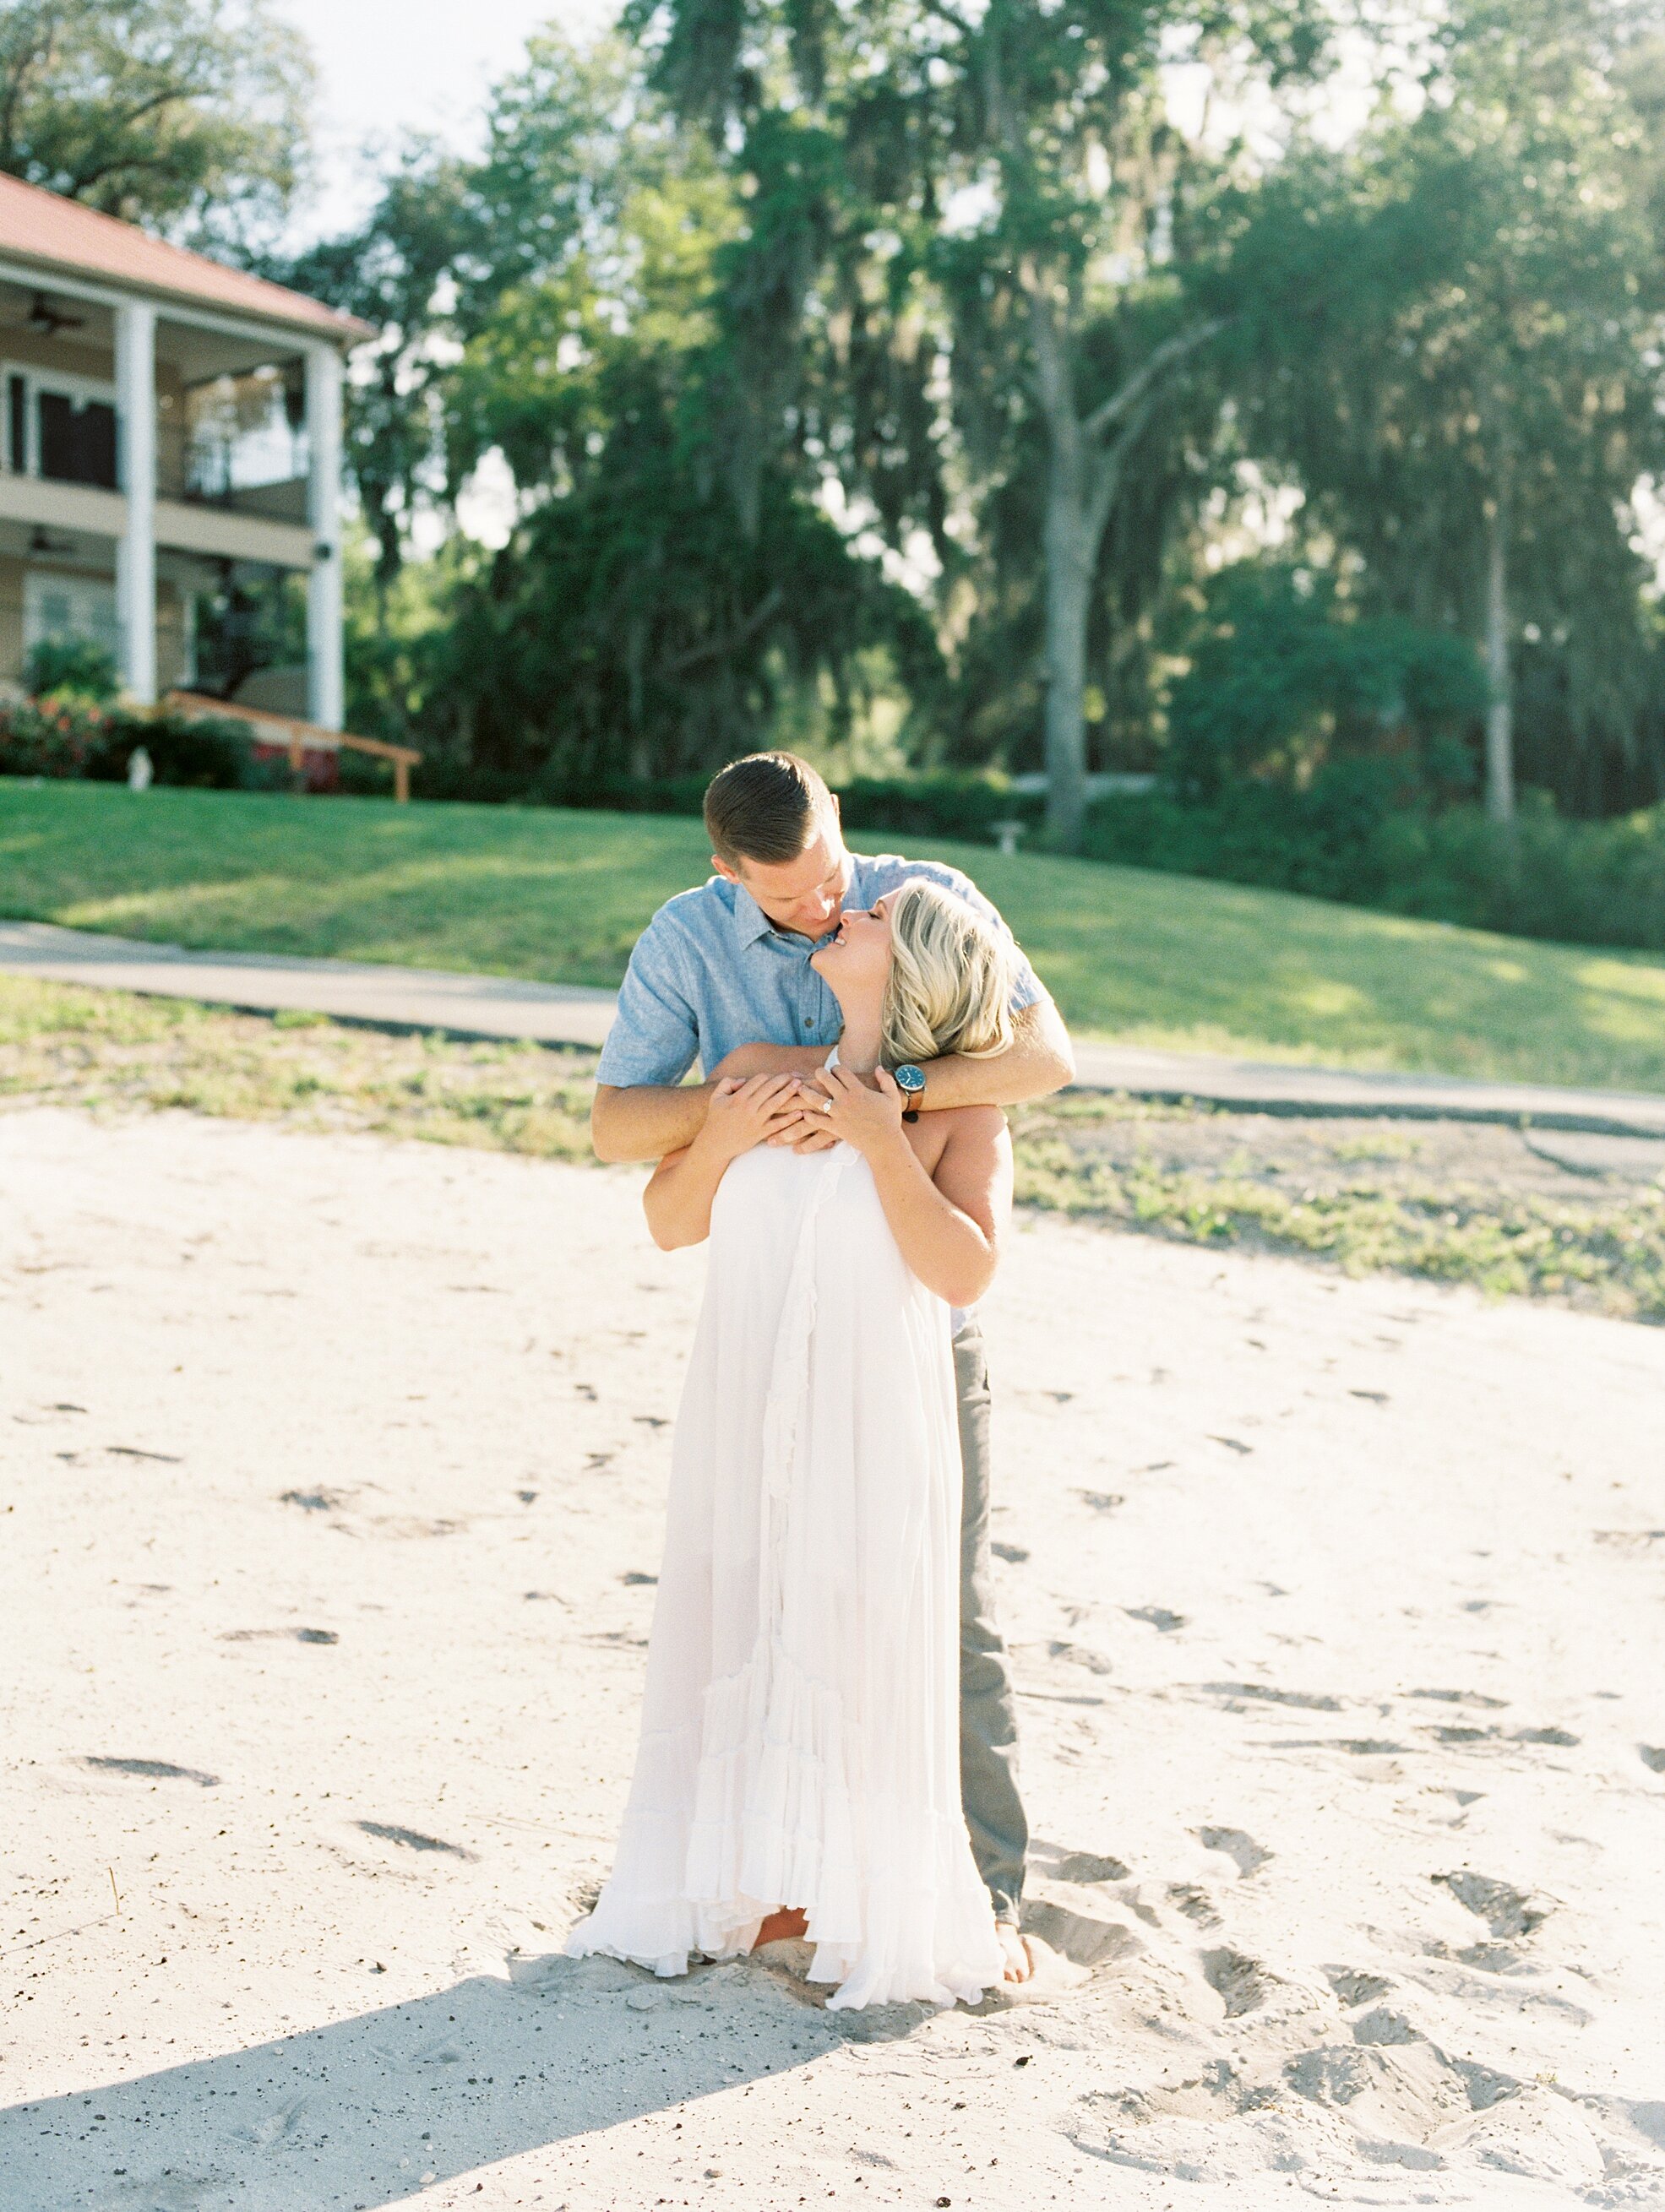 Lake House Engagement Session in Keystone Heights- Jacksonville, St. Augustine, Ponte Vedra Beach, Amelia Island, Florida Fine Art Film Wedding and Lifestyle Photography_0010a.jpg